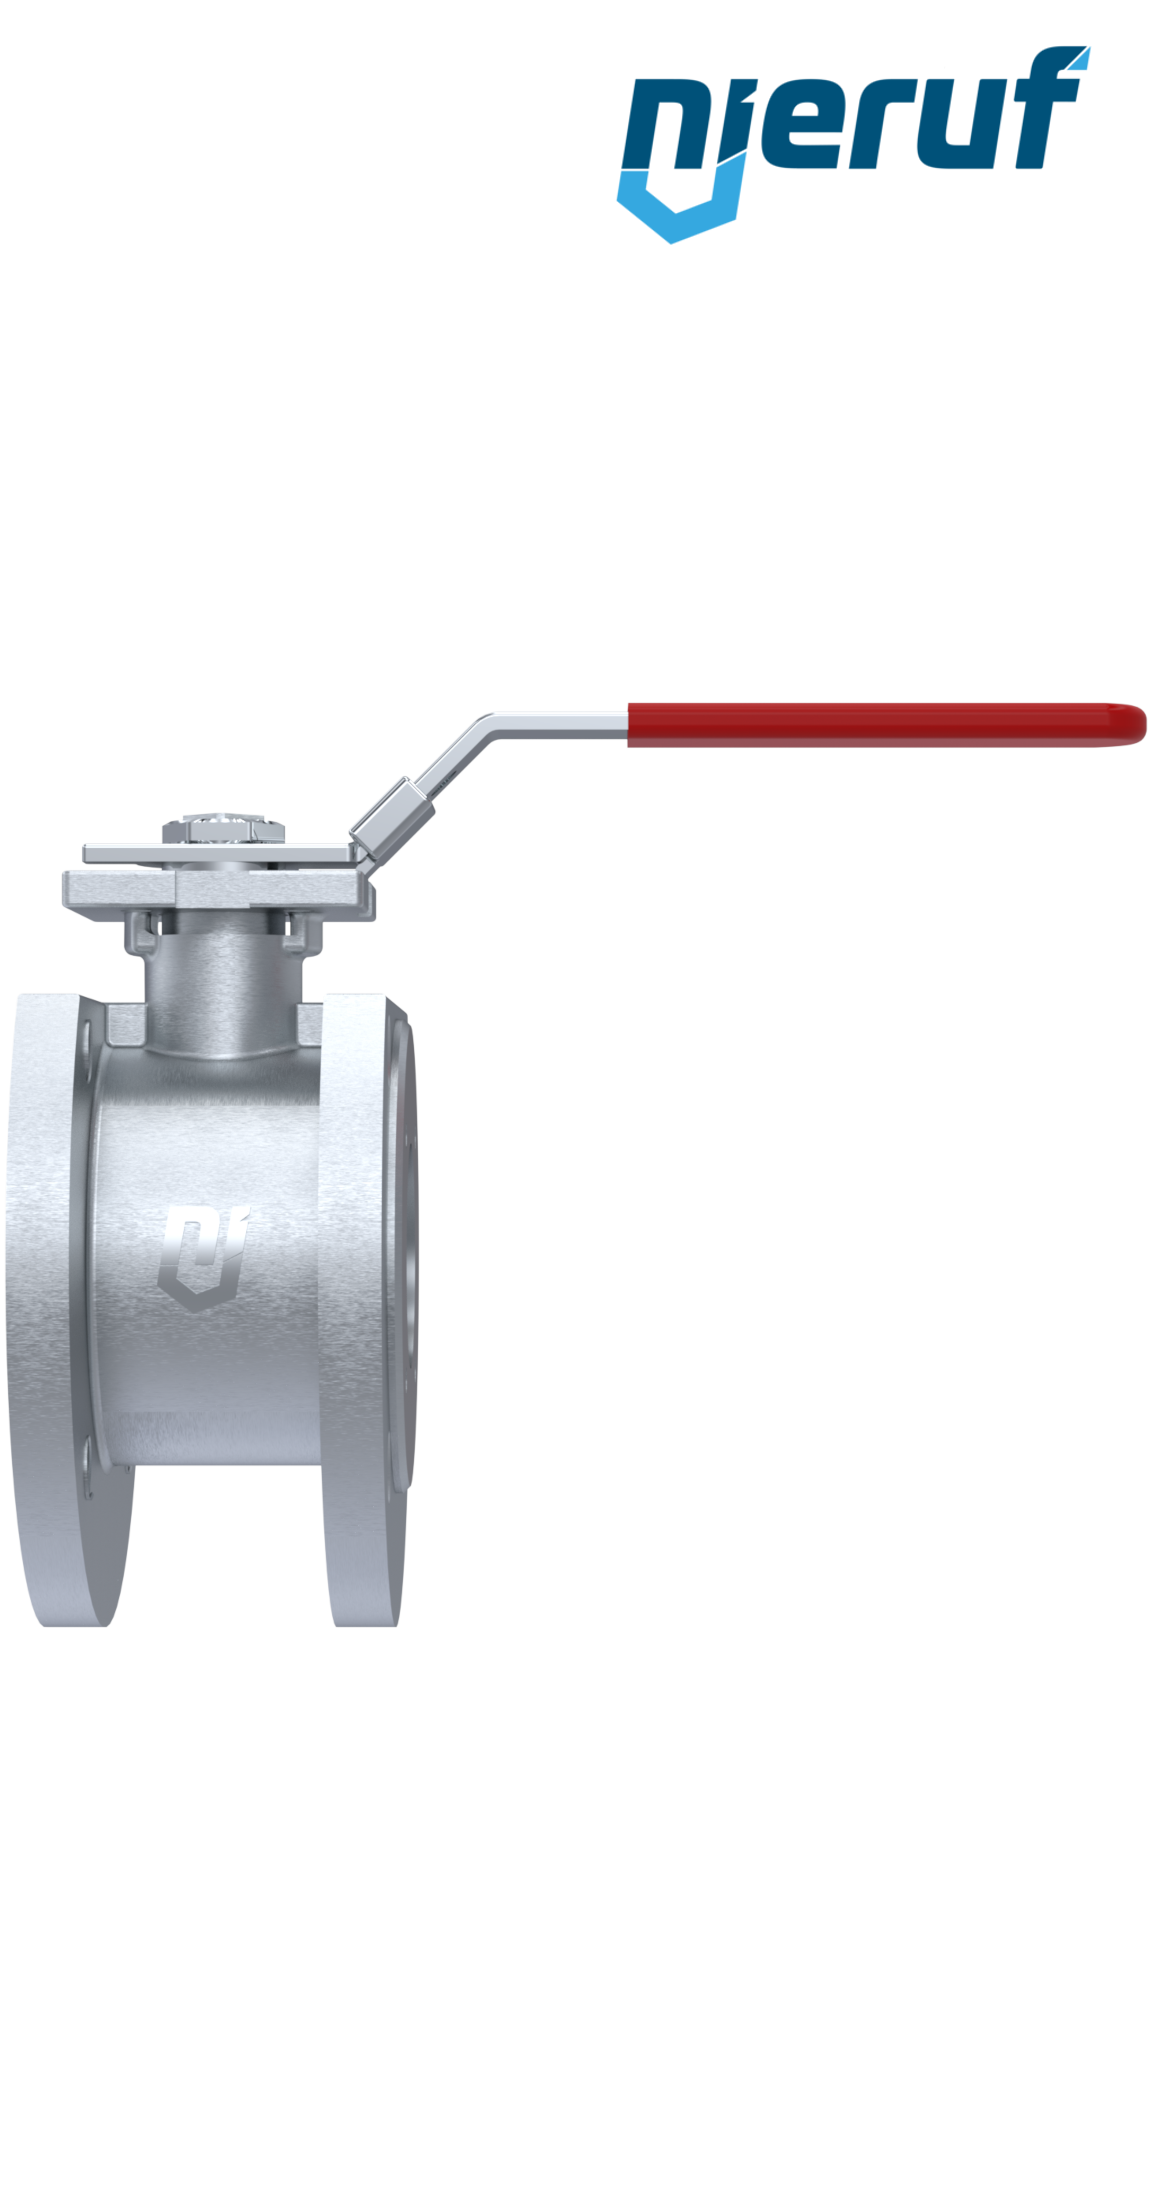 Compact ball valve stainless steel DN65 PN16 FK11